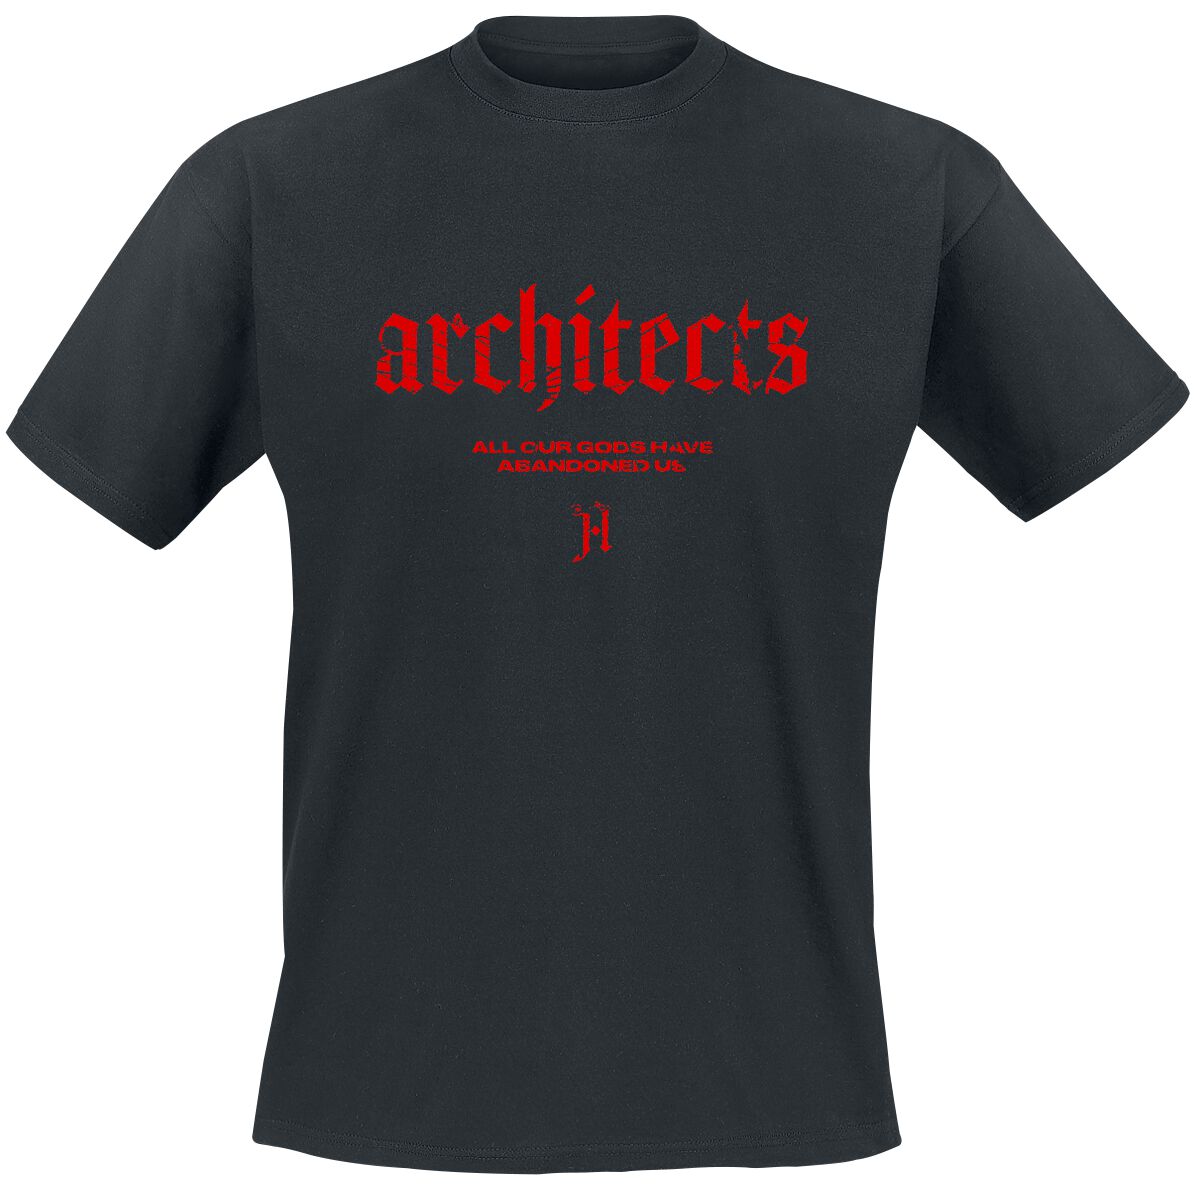 Image of T-Shirt di Architects - All our gods have abandoned us - S a XXL - Uomo - nero